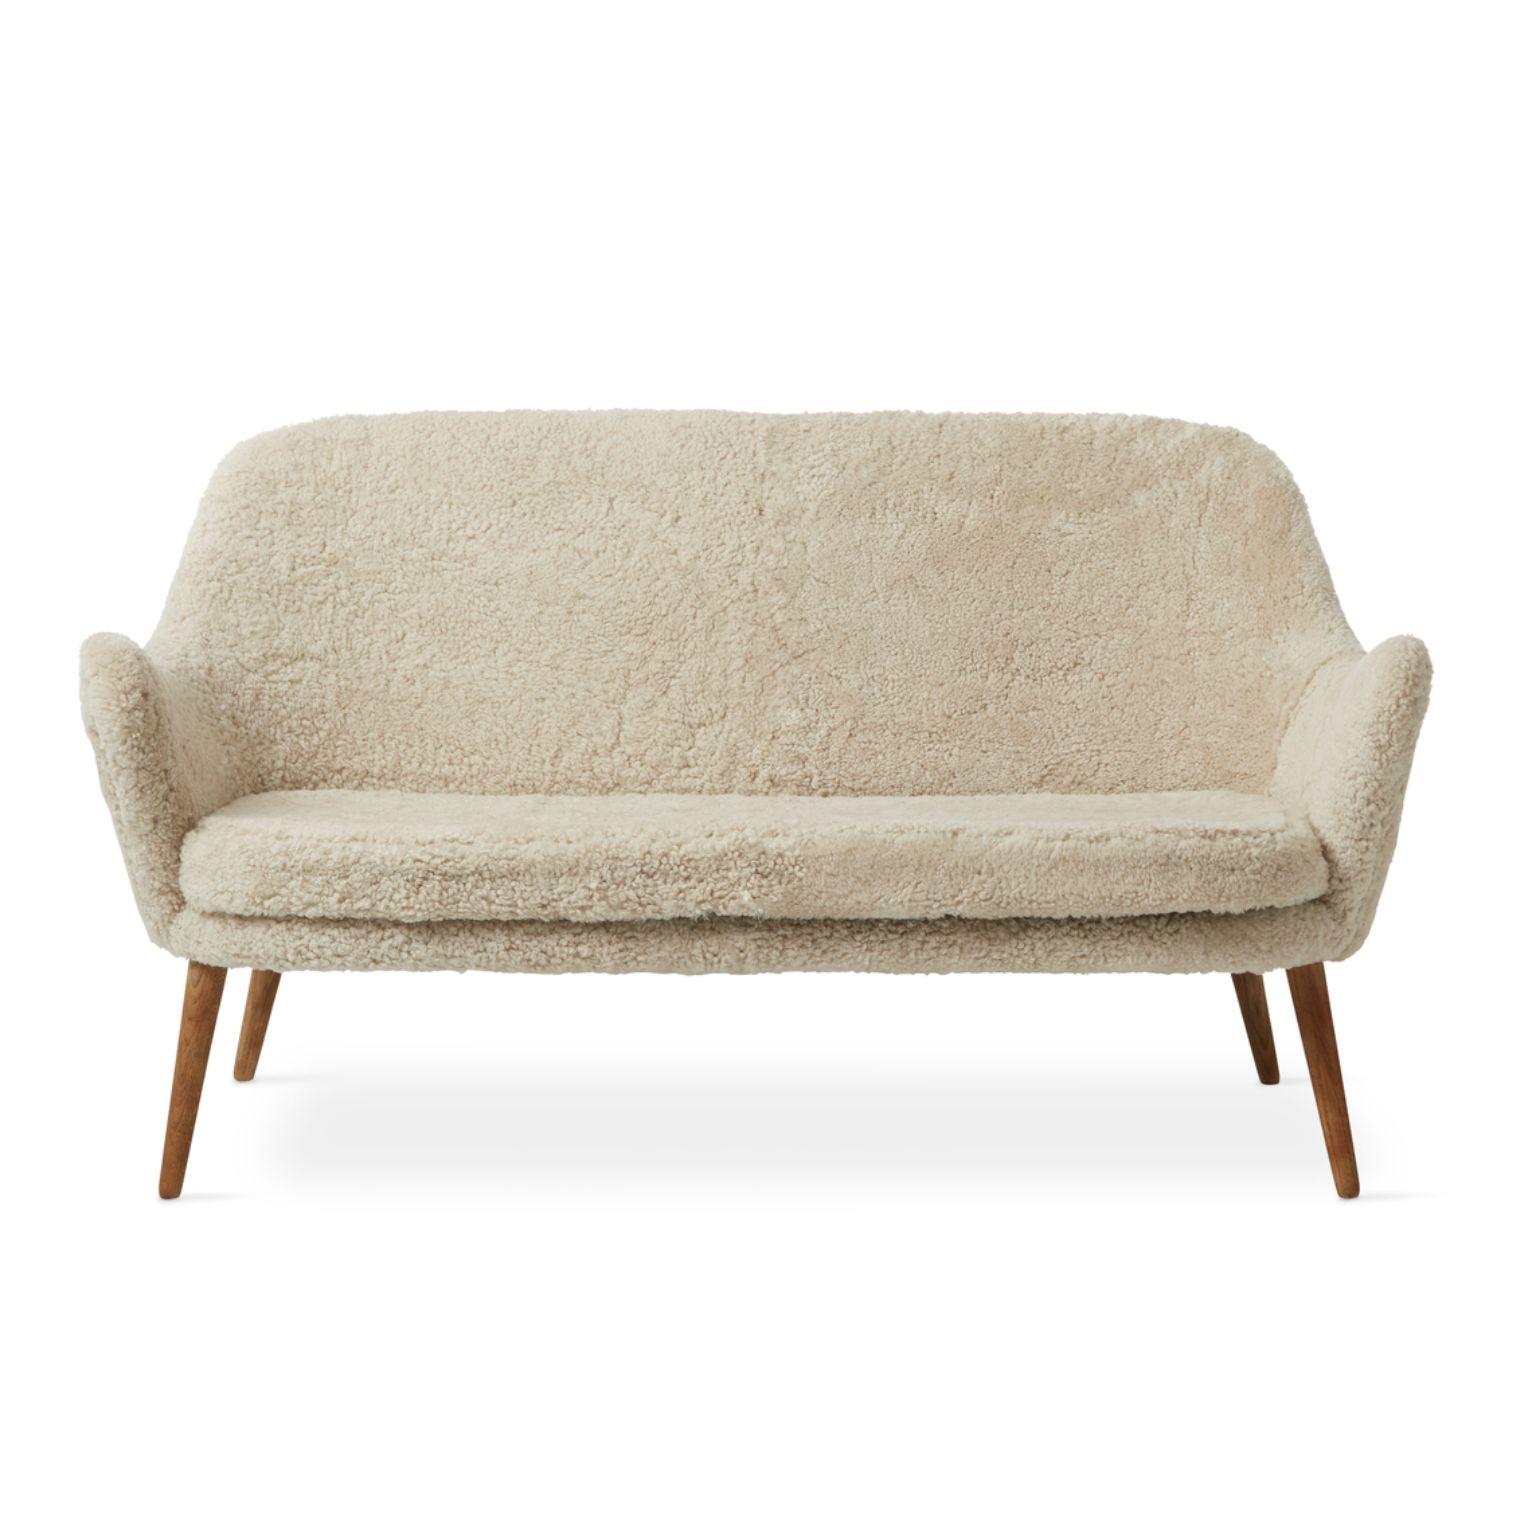 Dwell 2 seater sheepskin moonlight by Warm Nordic.
Dimensions: D137 x W66 x H 73 cm.
Material: sheepskin upholstery, solid smoked or white oiled oak legs, wooden frame, foam, spring system.
Weight: 35 kg.
Also available in different colours and